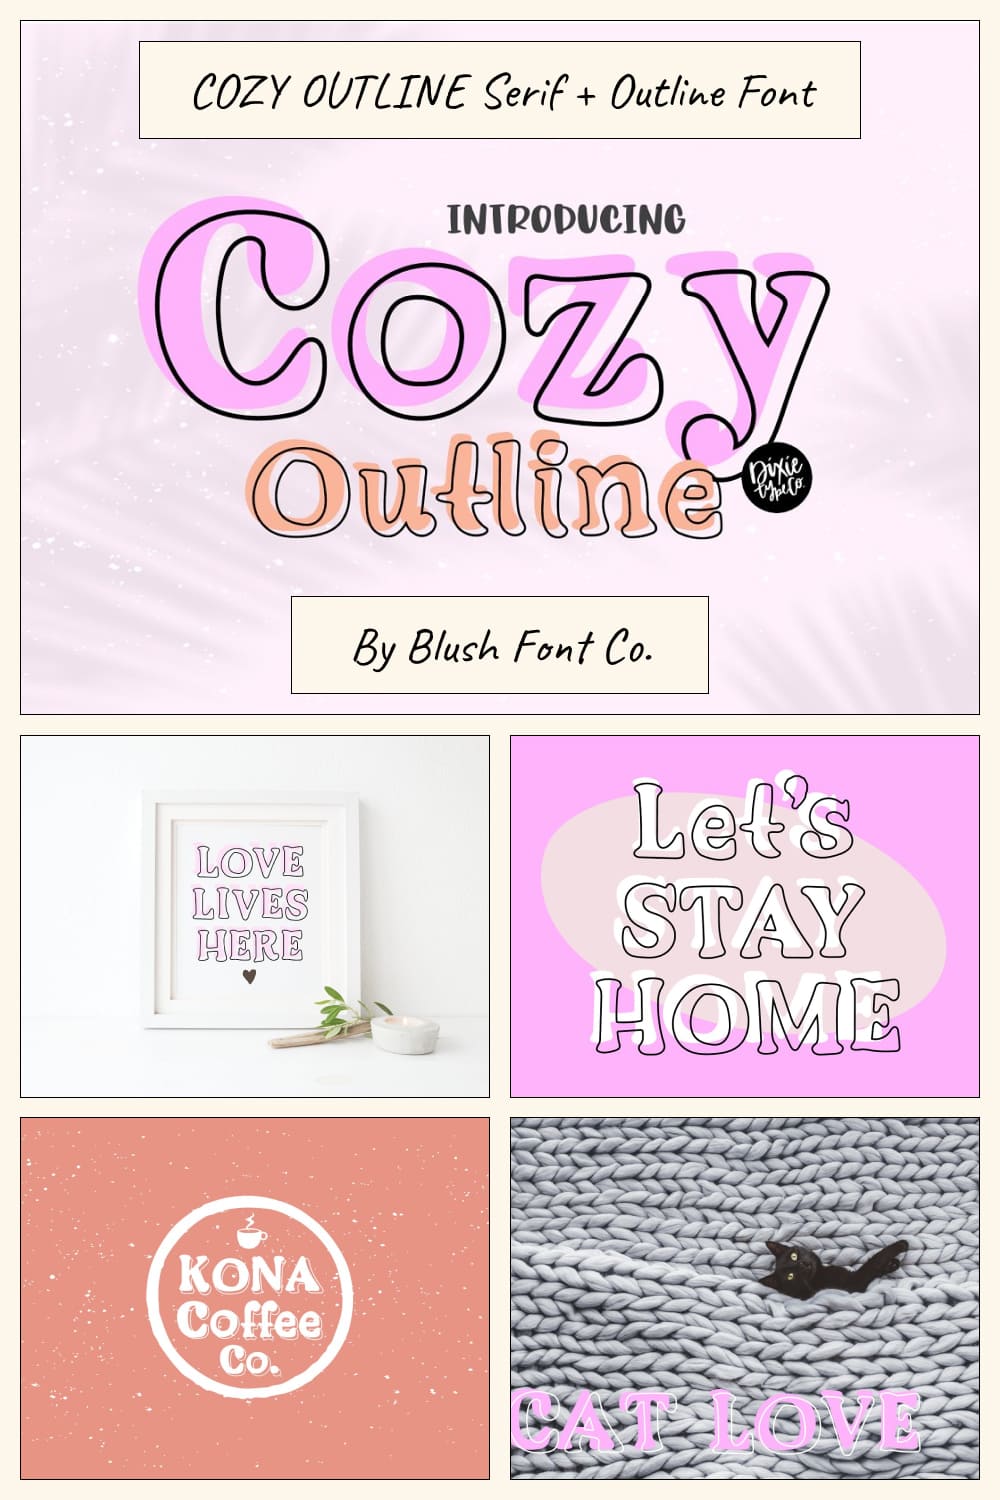 Introducing Cozy Outline - "Let's Stay Home".